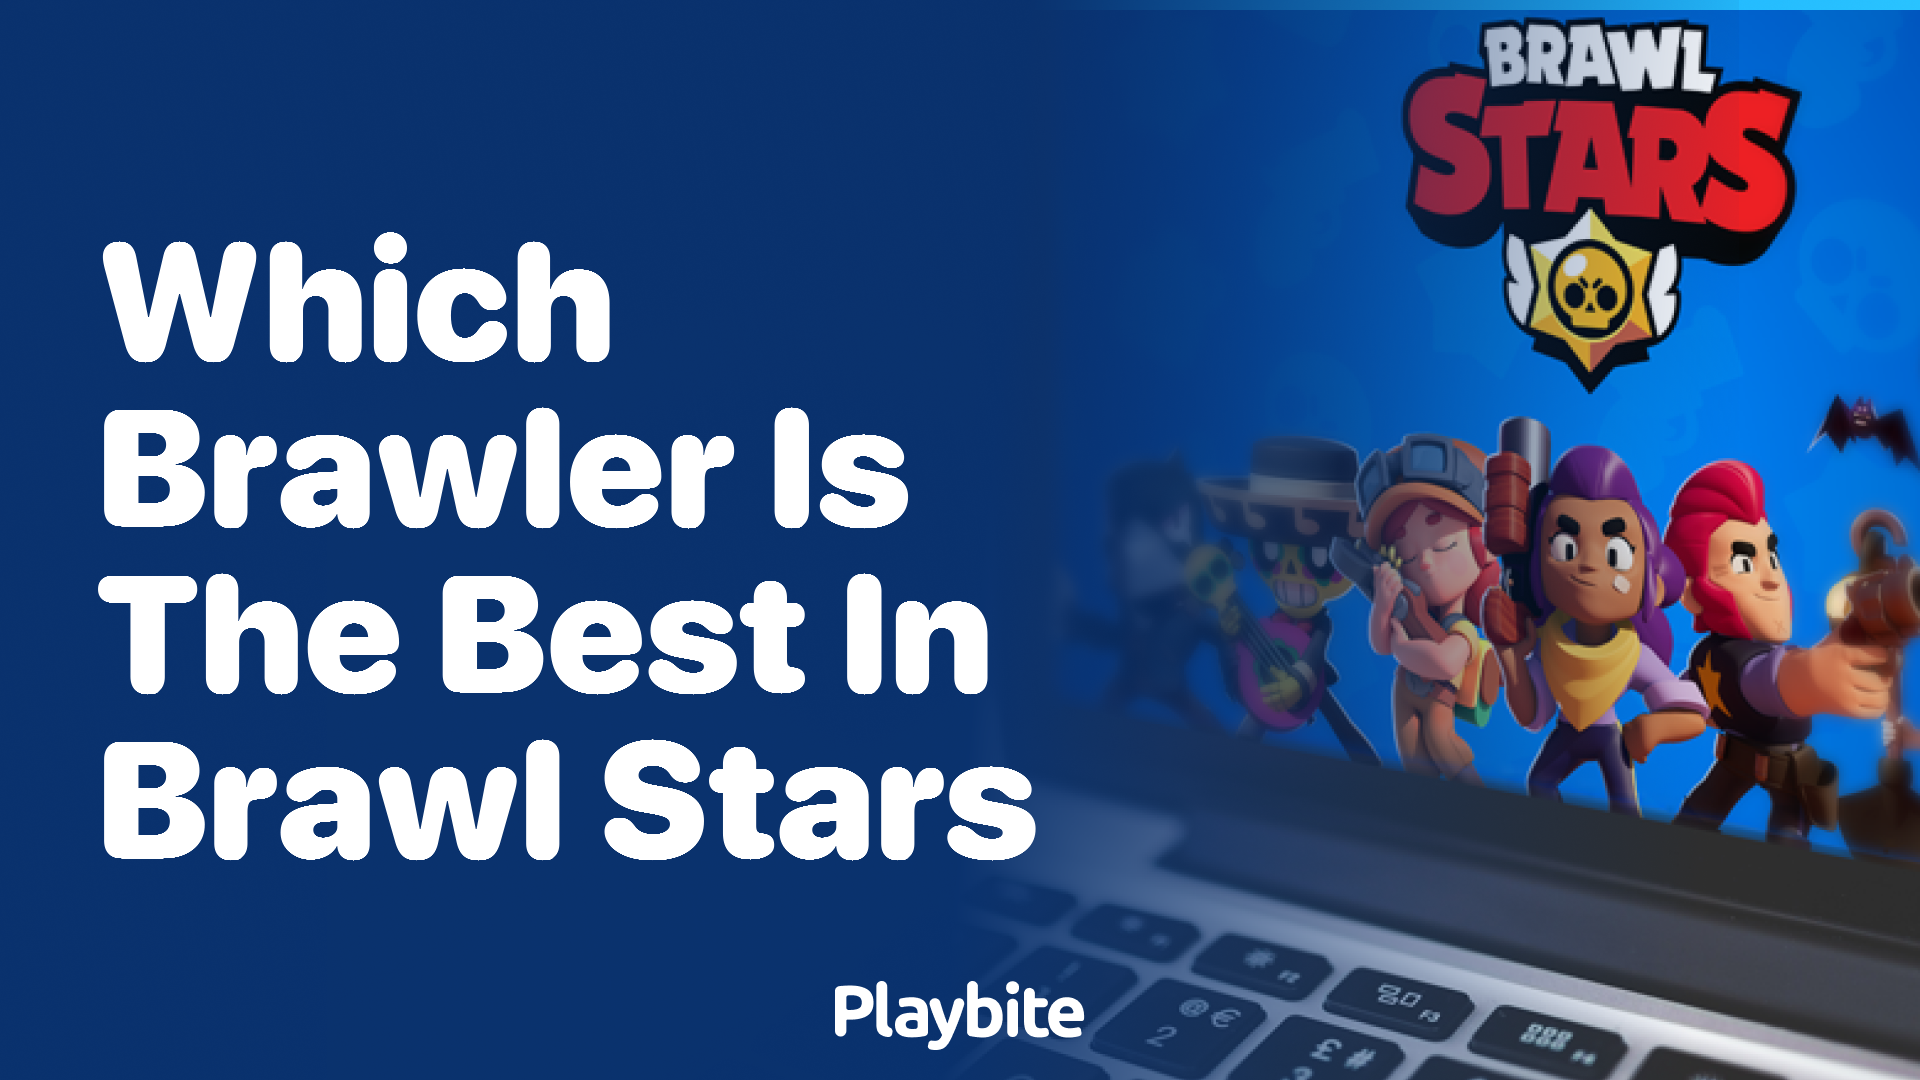 Which Brawler Tops the Charts in Brawl Stars?